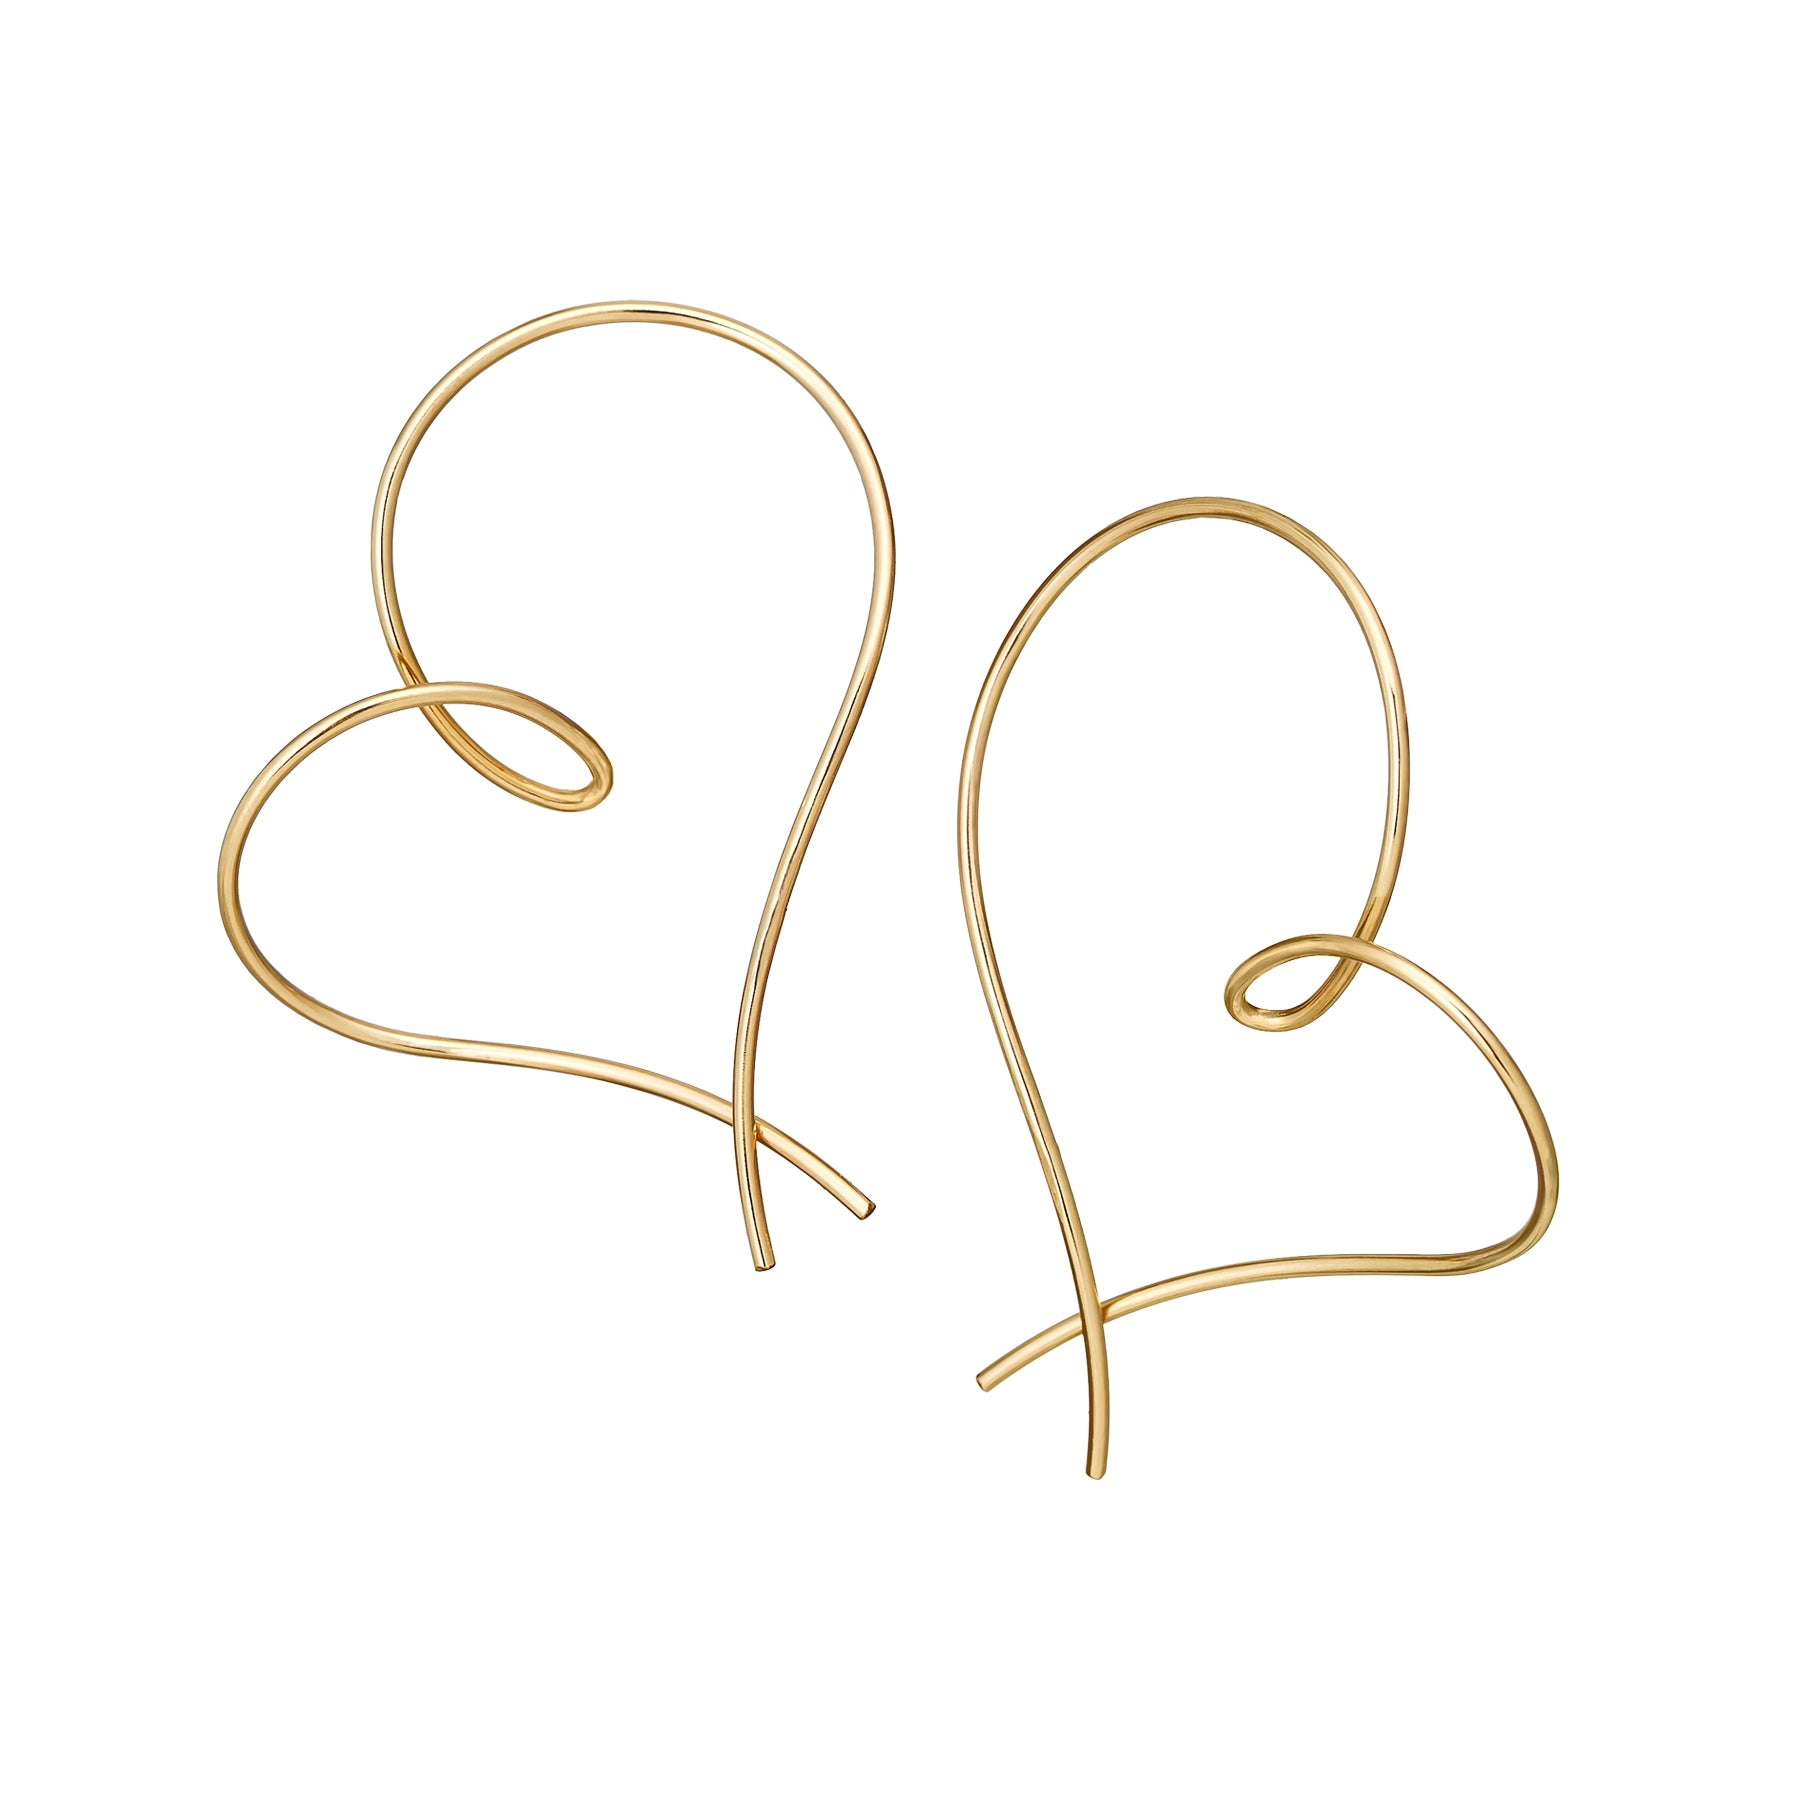 Gold Filled Twisted Heart Earrings - Product Image